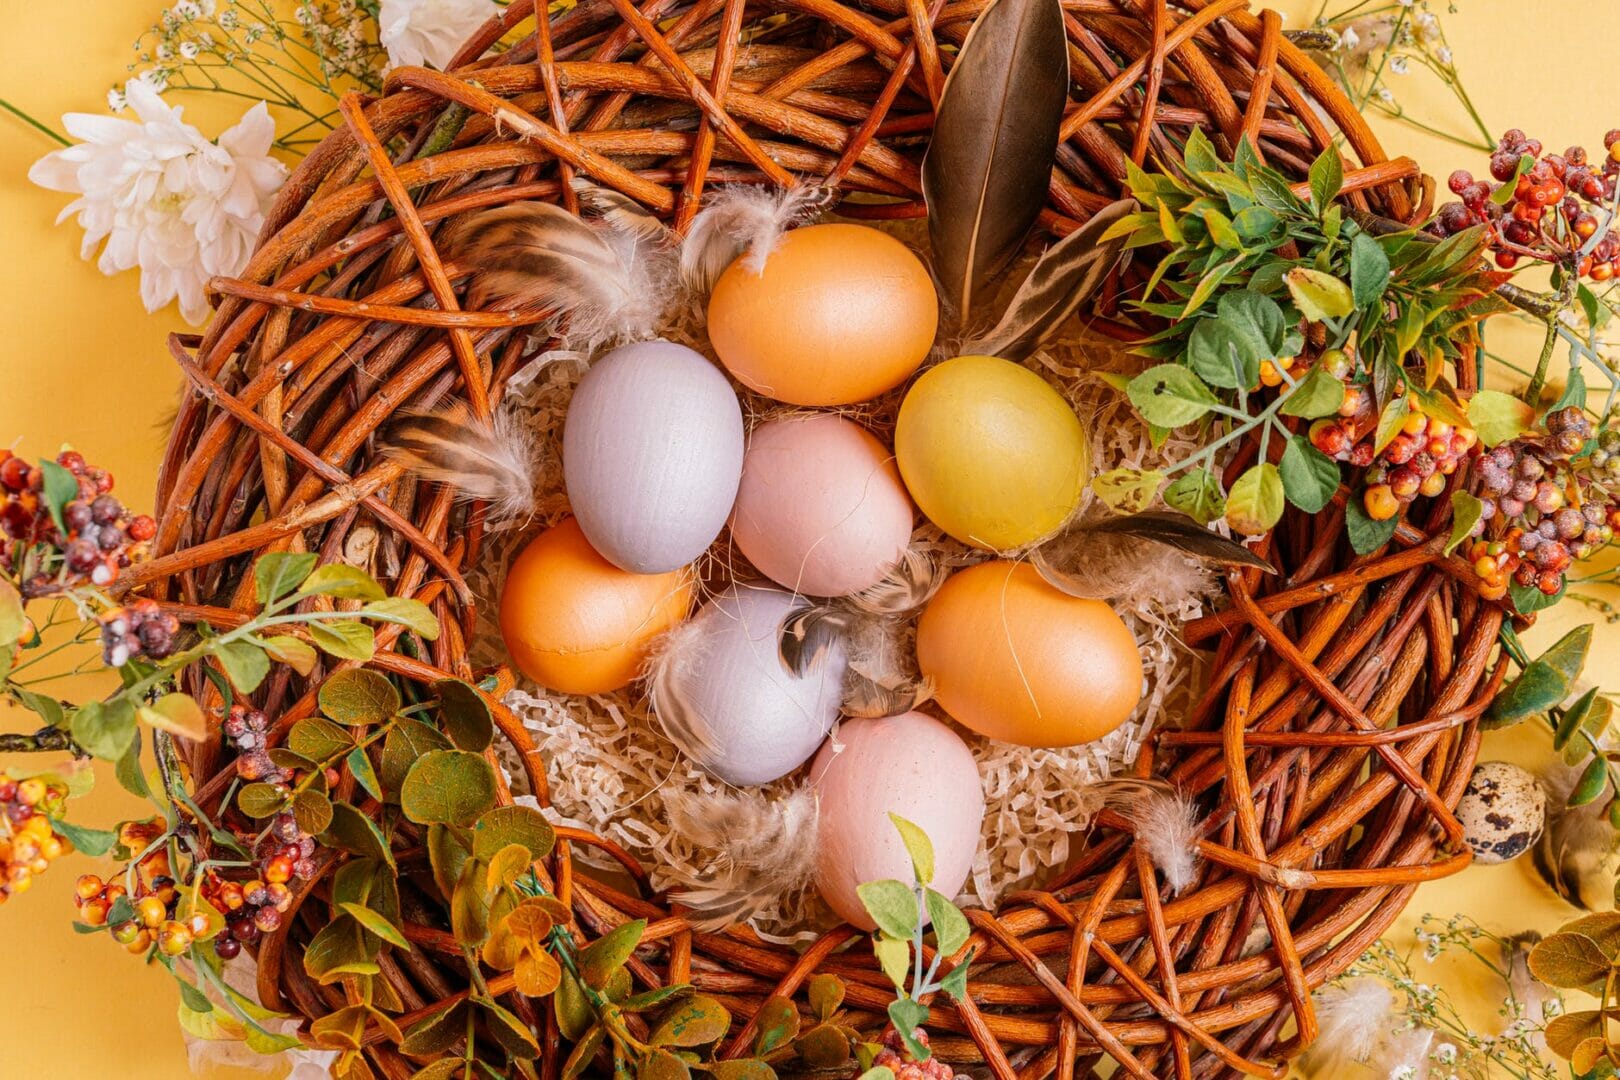 painted eggs on a nest - Easter in Vienna 